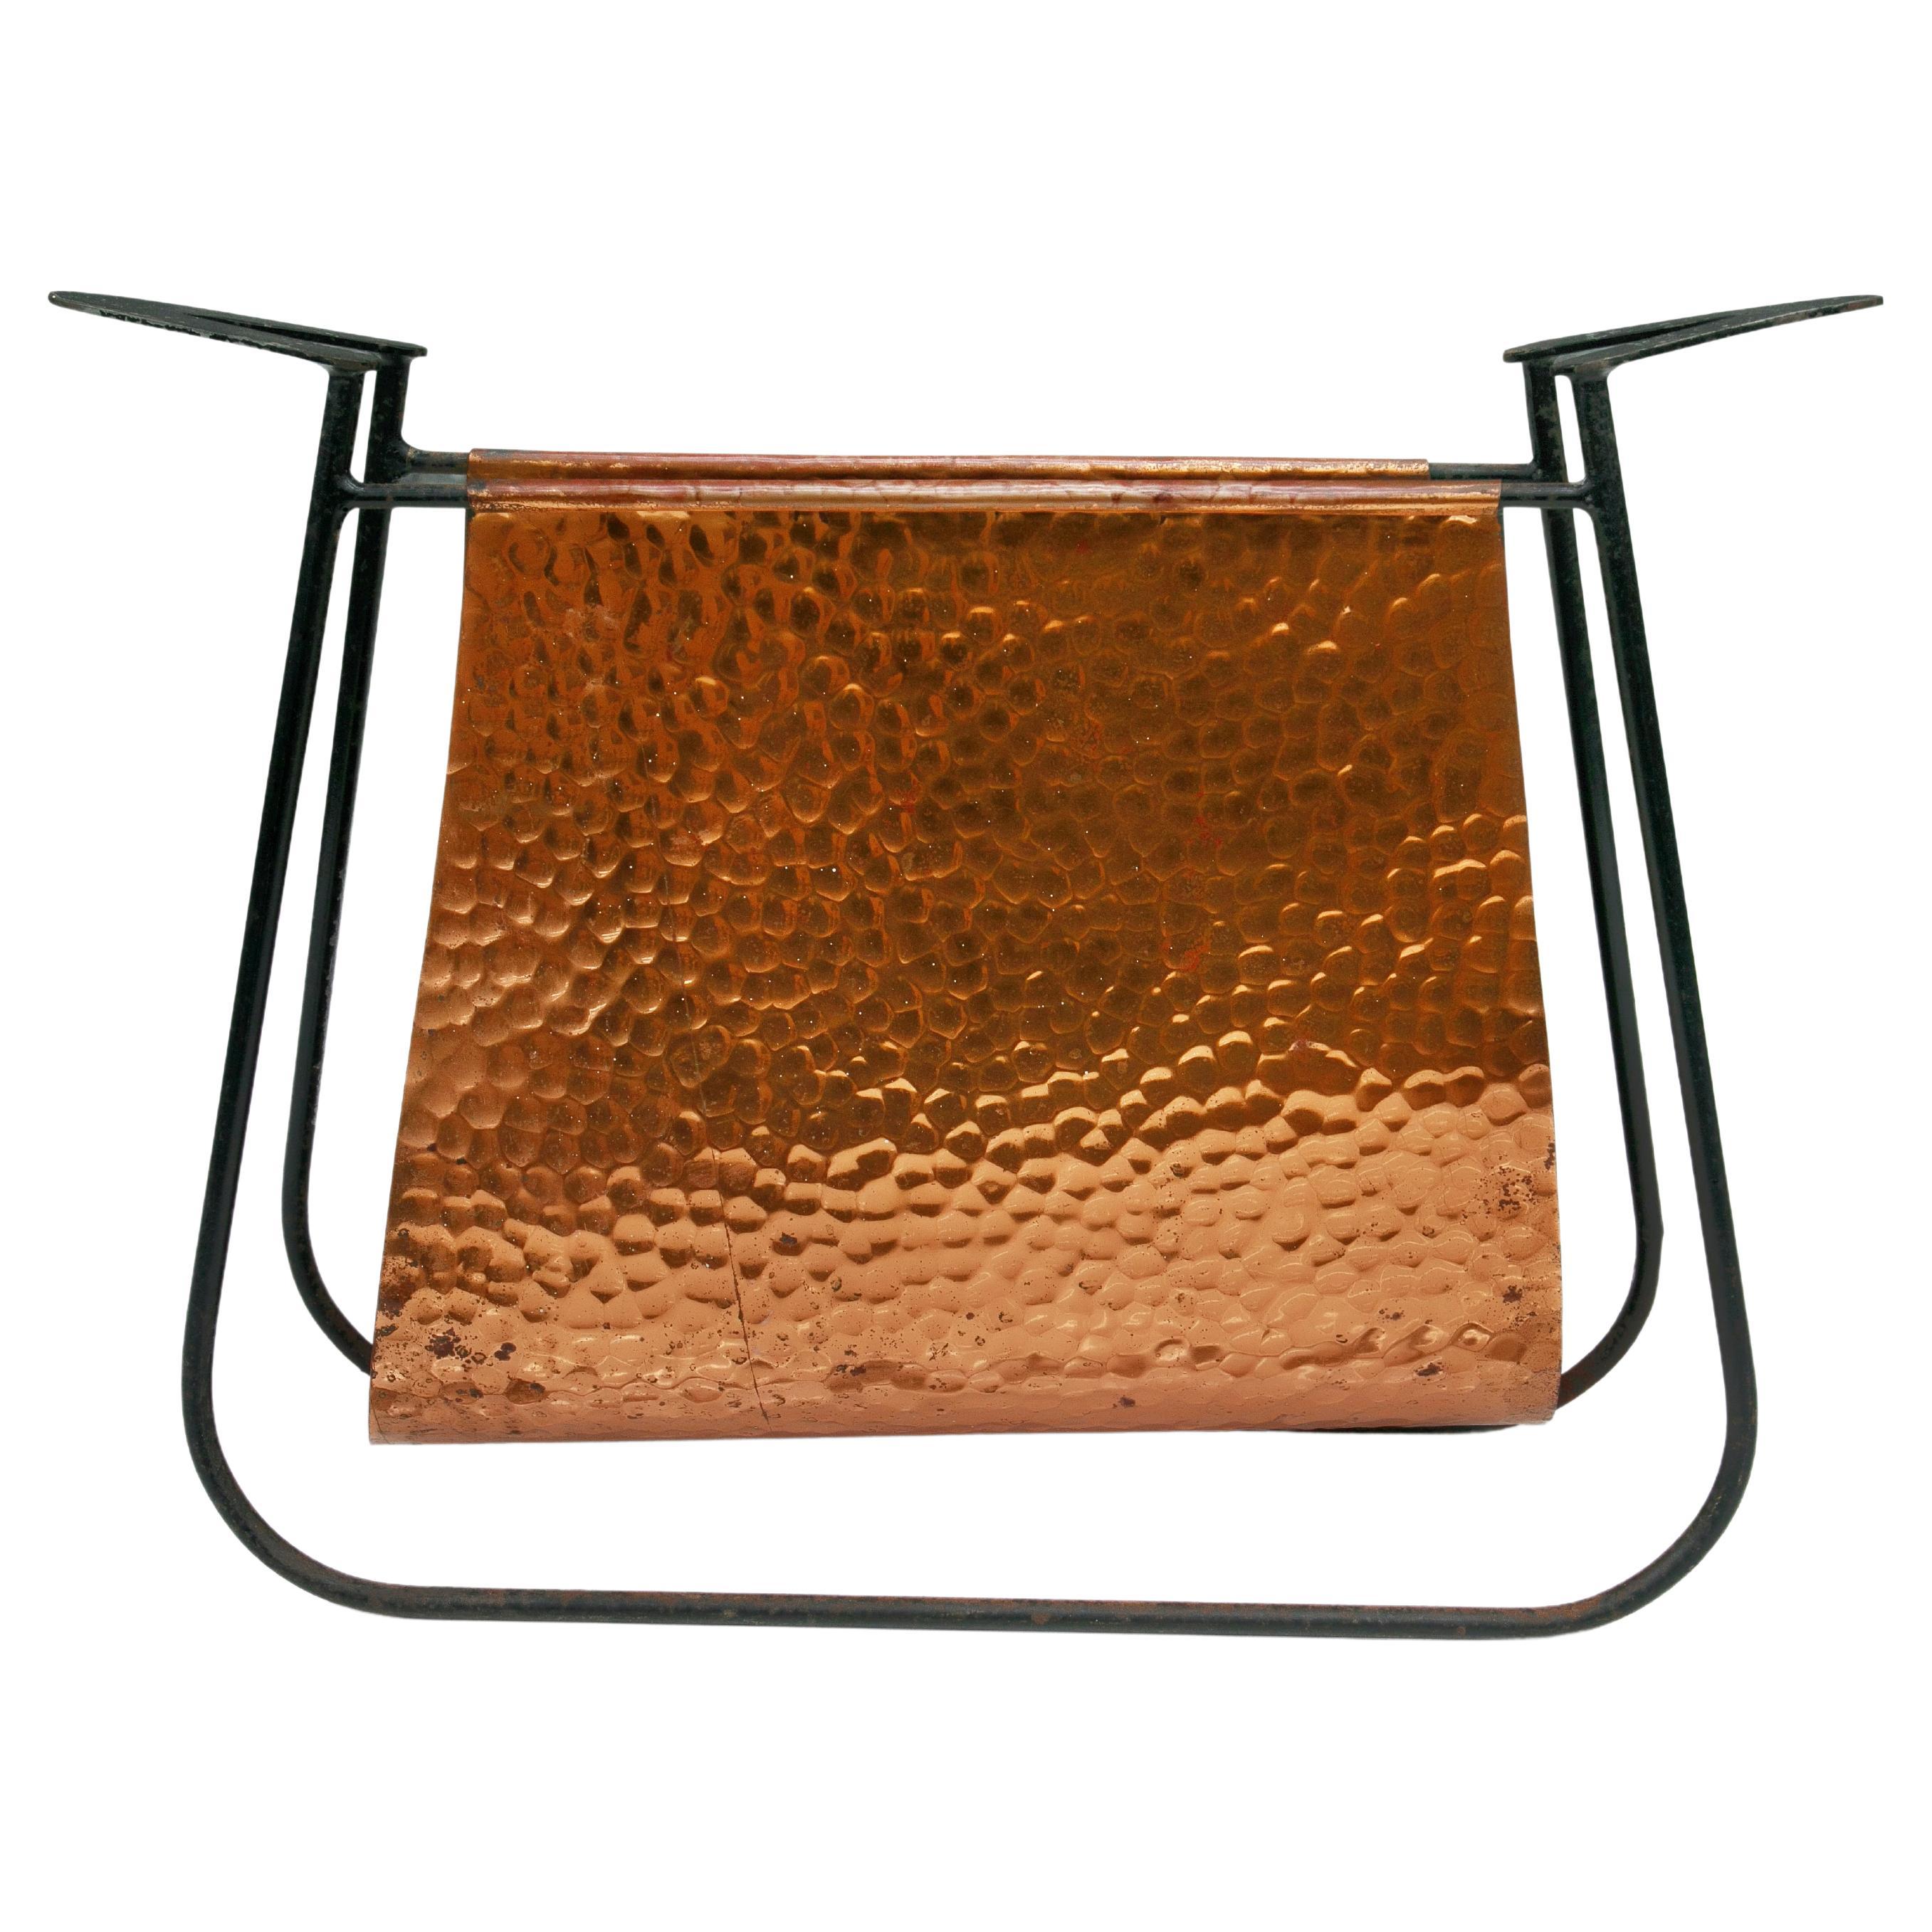 Available today, this Brazilian Modern Magazine Rack made in Copper & Iron by Carlo Hauner & Martin Eisler in the 1950s in Brazil is gorgeous!

The magazine rack features a curved metal in black structure with a shiny hammered copper holder. An